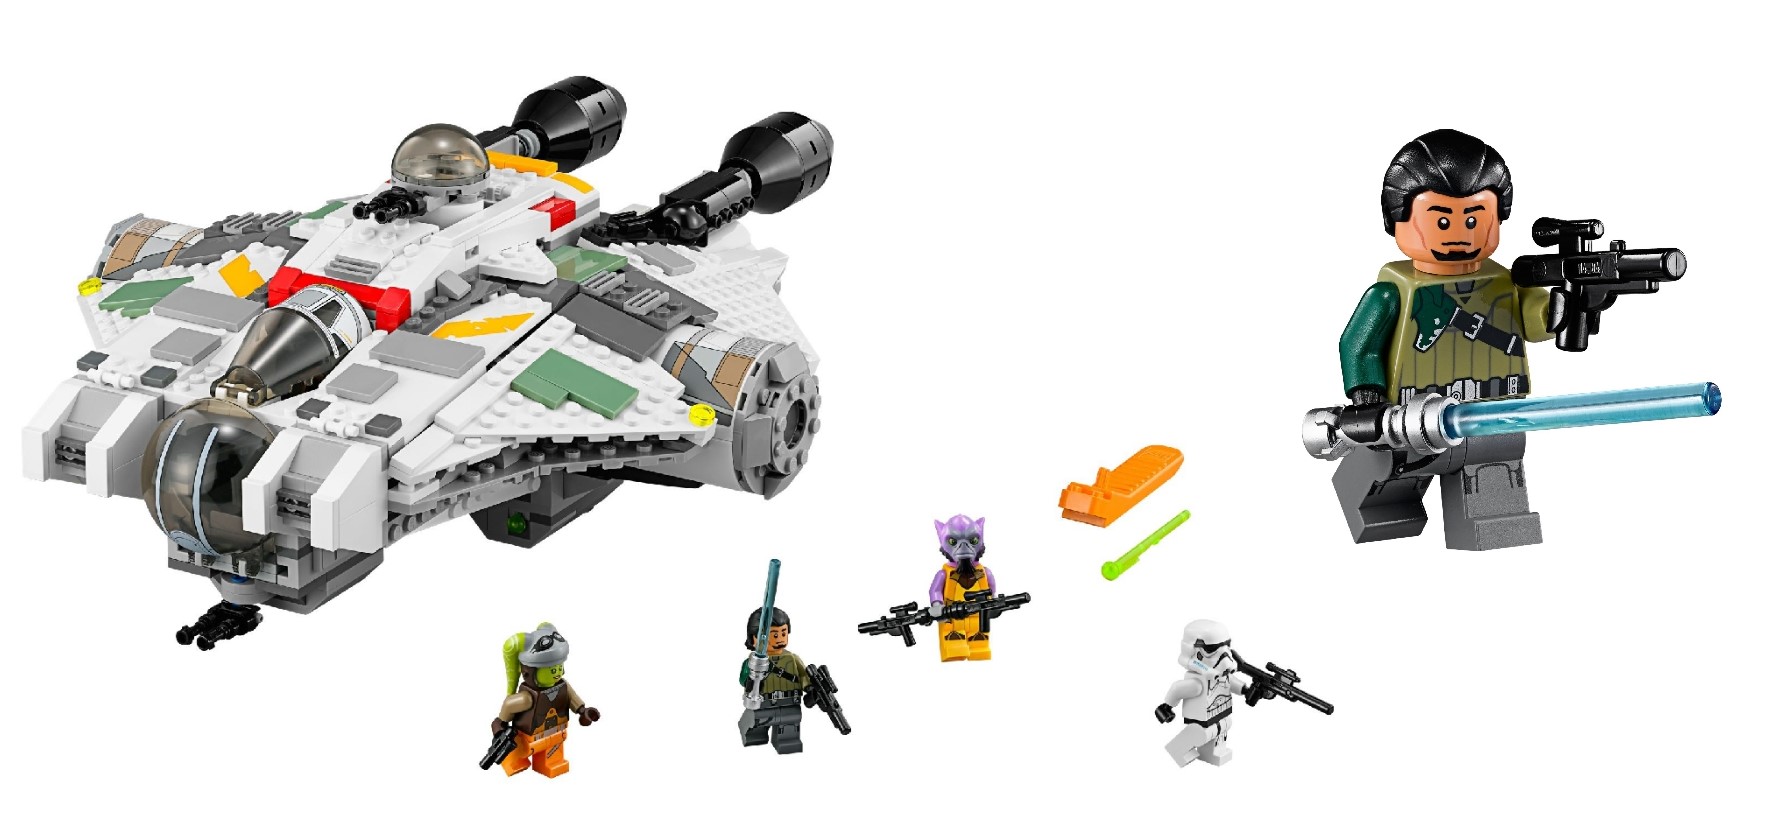 LEGO Star Wars Sets the ghost